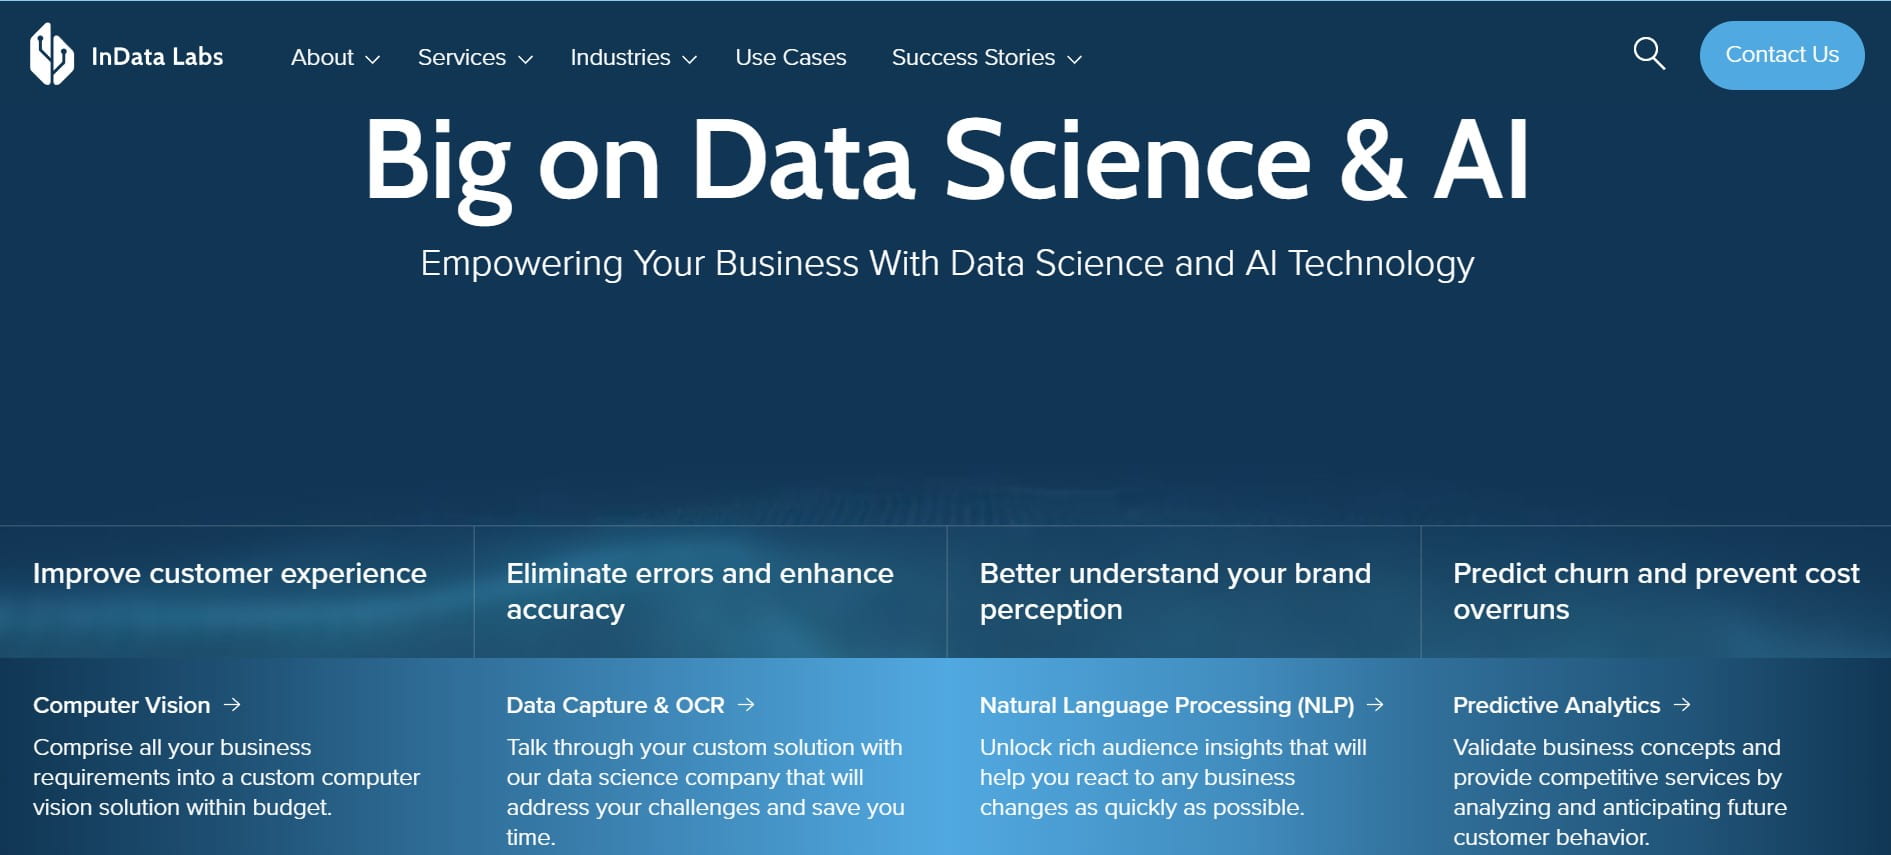 indata labs company career page